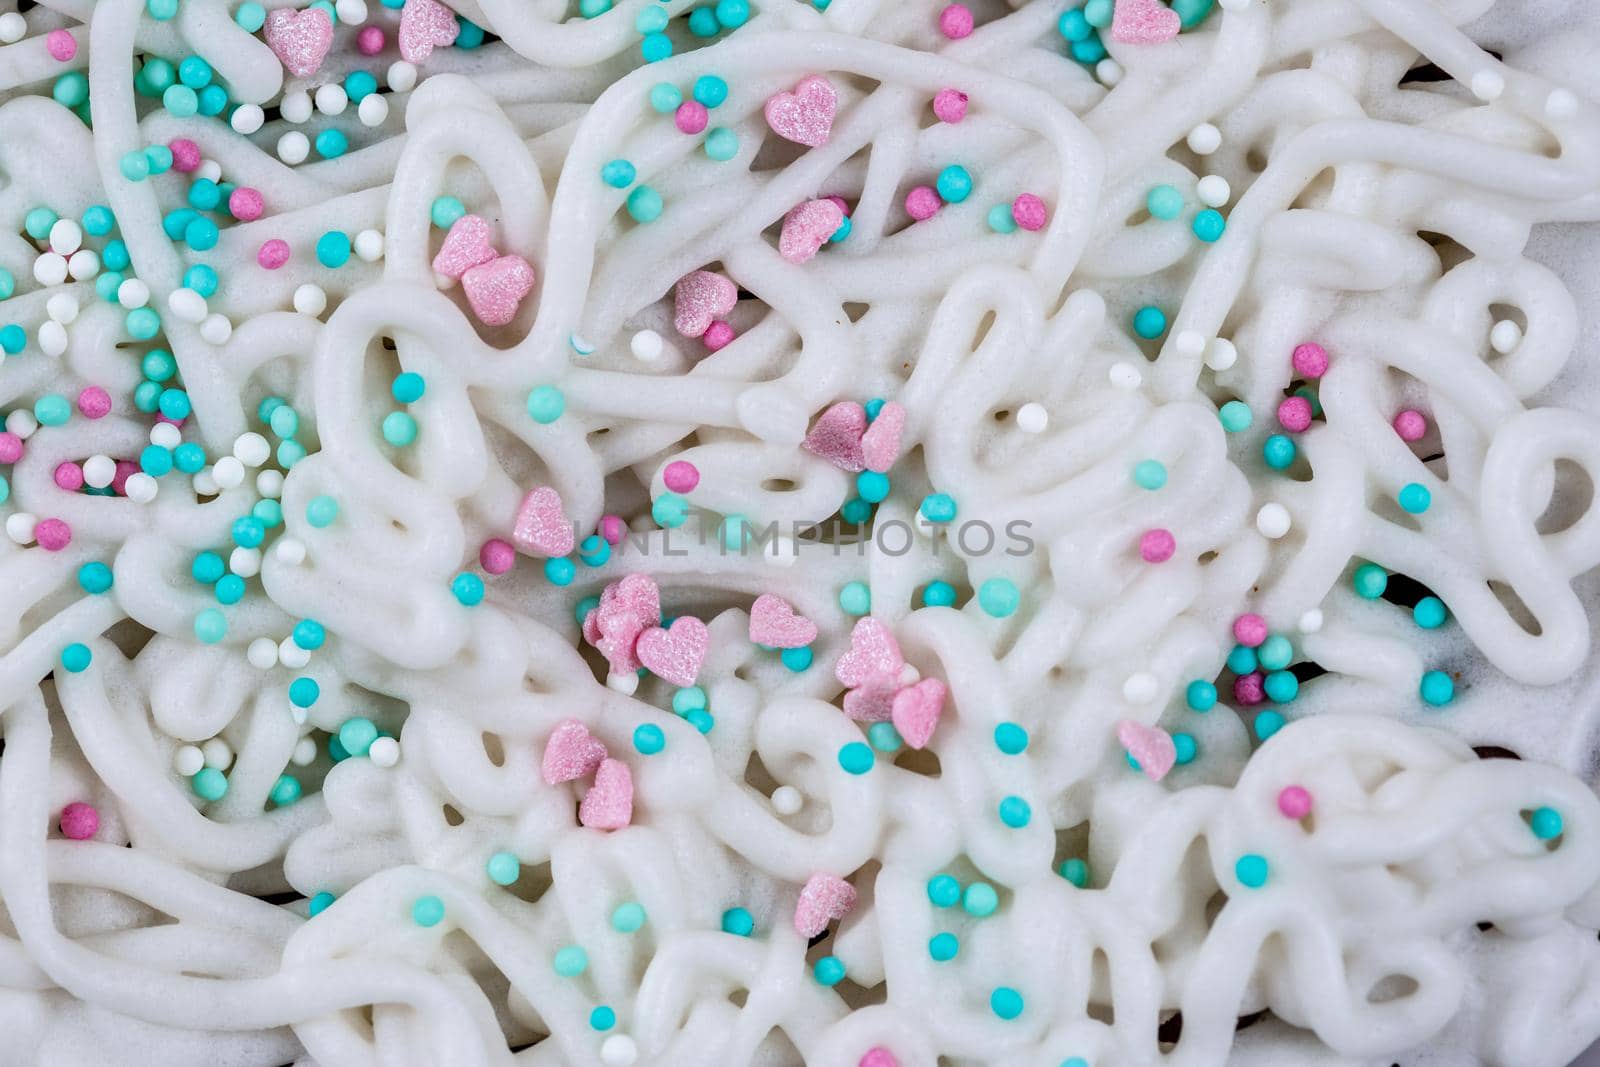 The texture of icing on a cake with pastry sprinkles, macro photography by galinasharapova